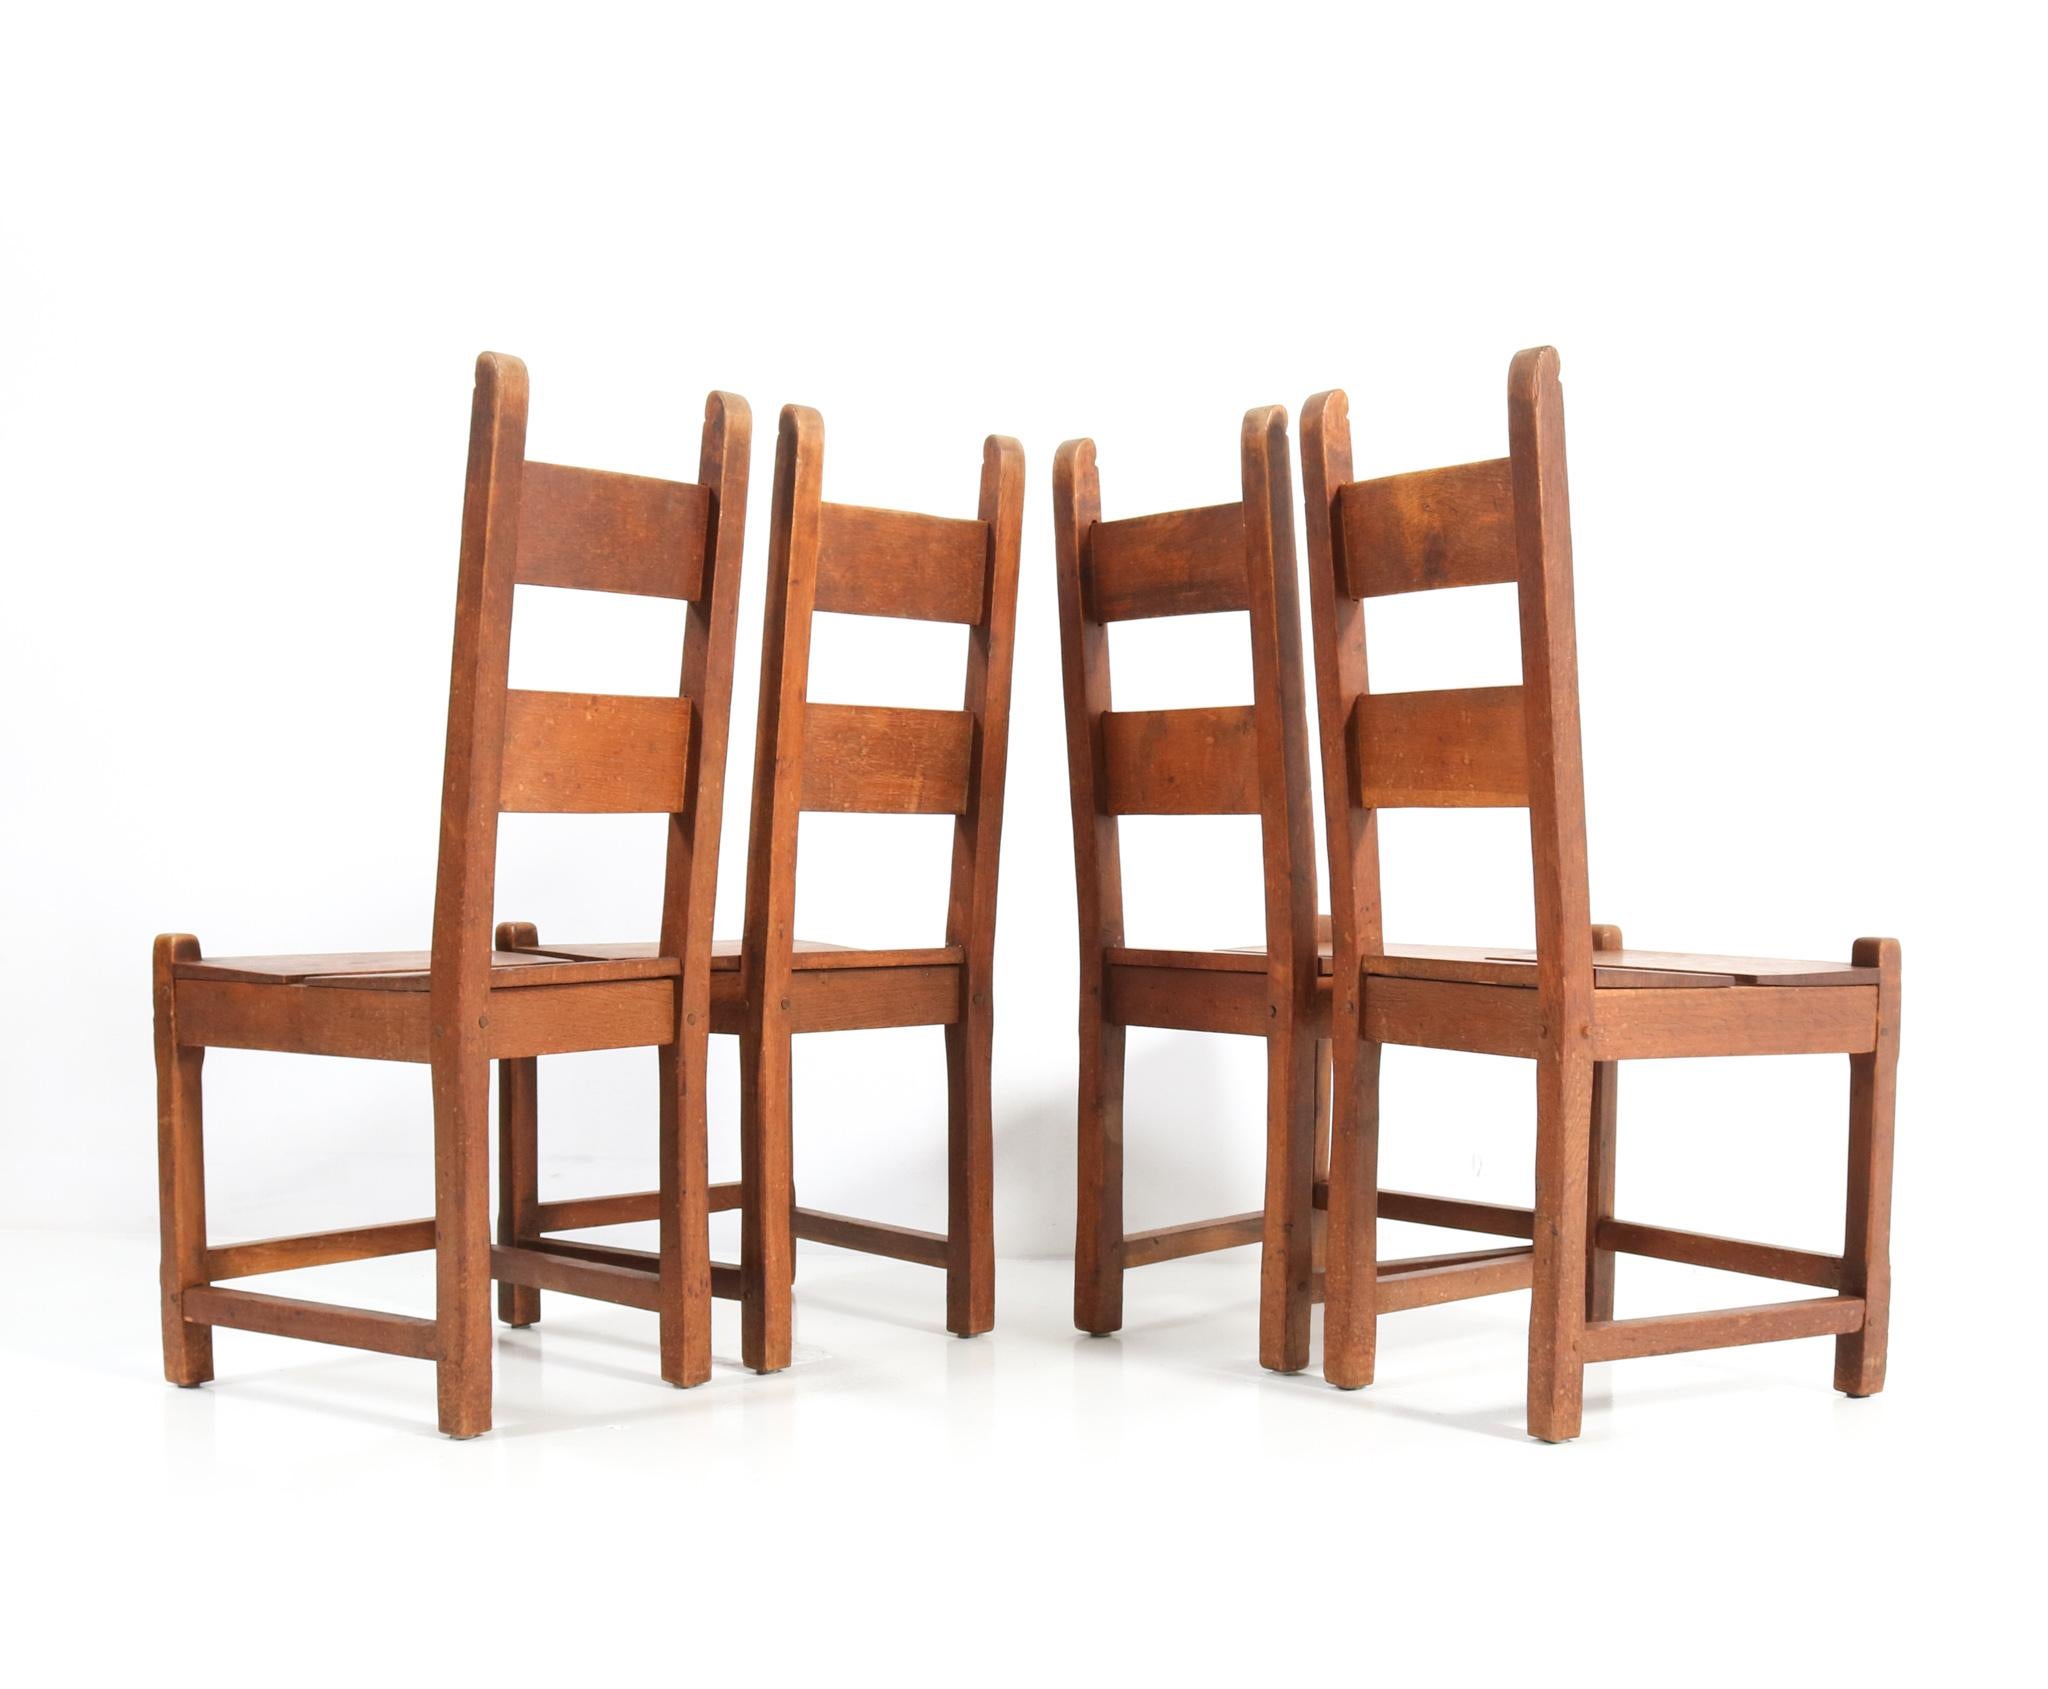 Mid-20th Century Four Oak Rustic Brutalist Chairs, 1940s For Sale